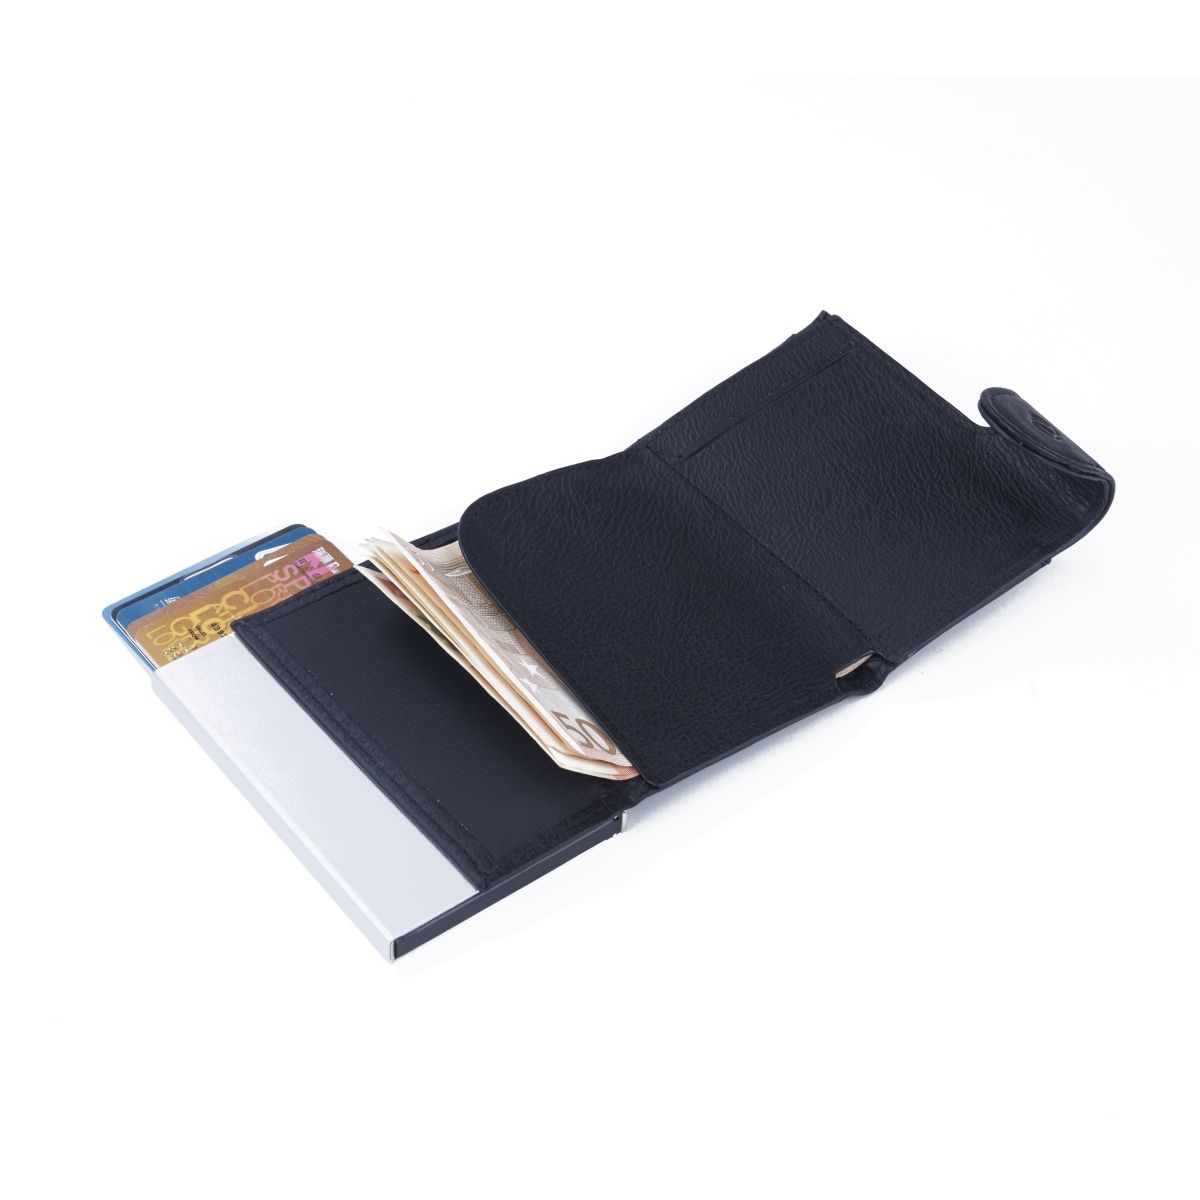 C-Secure Aluminum Card Holder with Genuine Leather - Auburn Brown